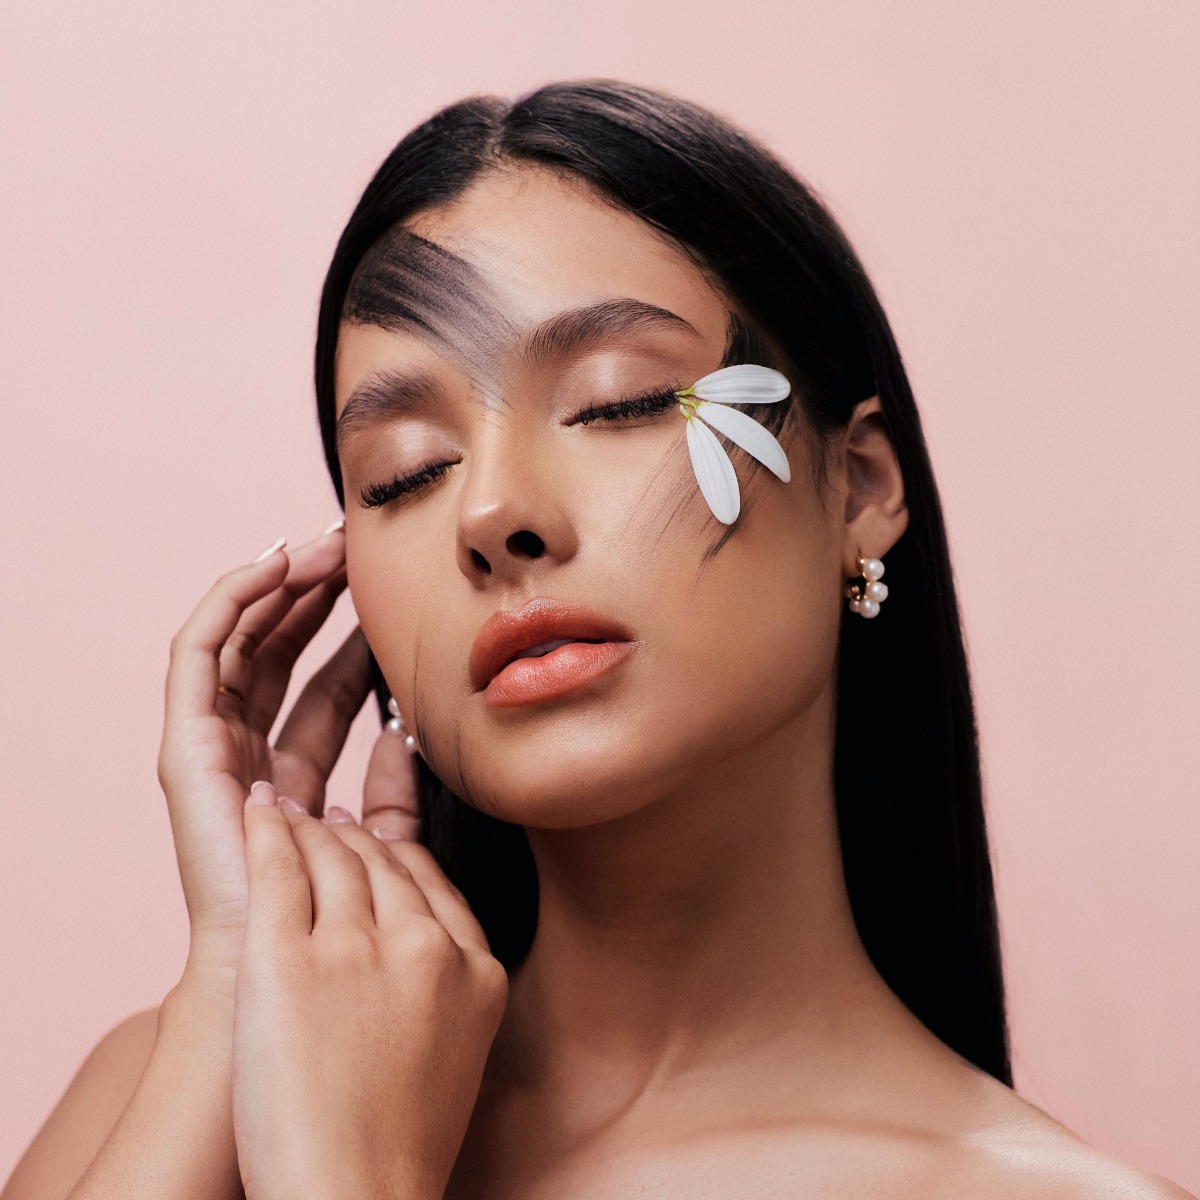 woman posing with makeup and a flower on her face